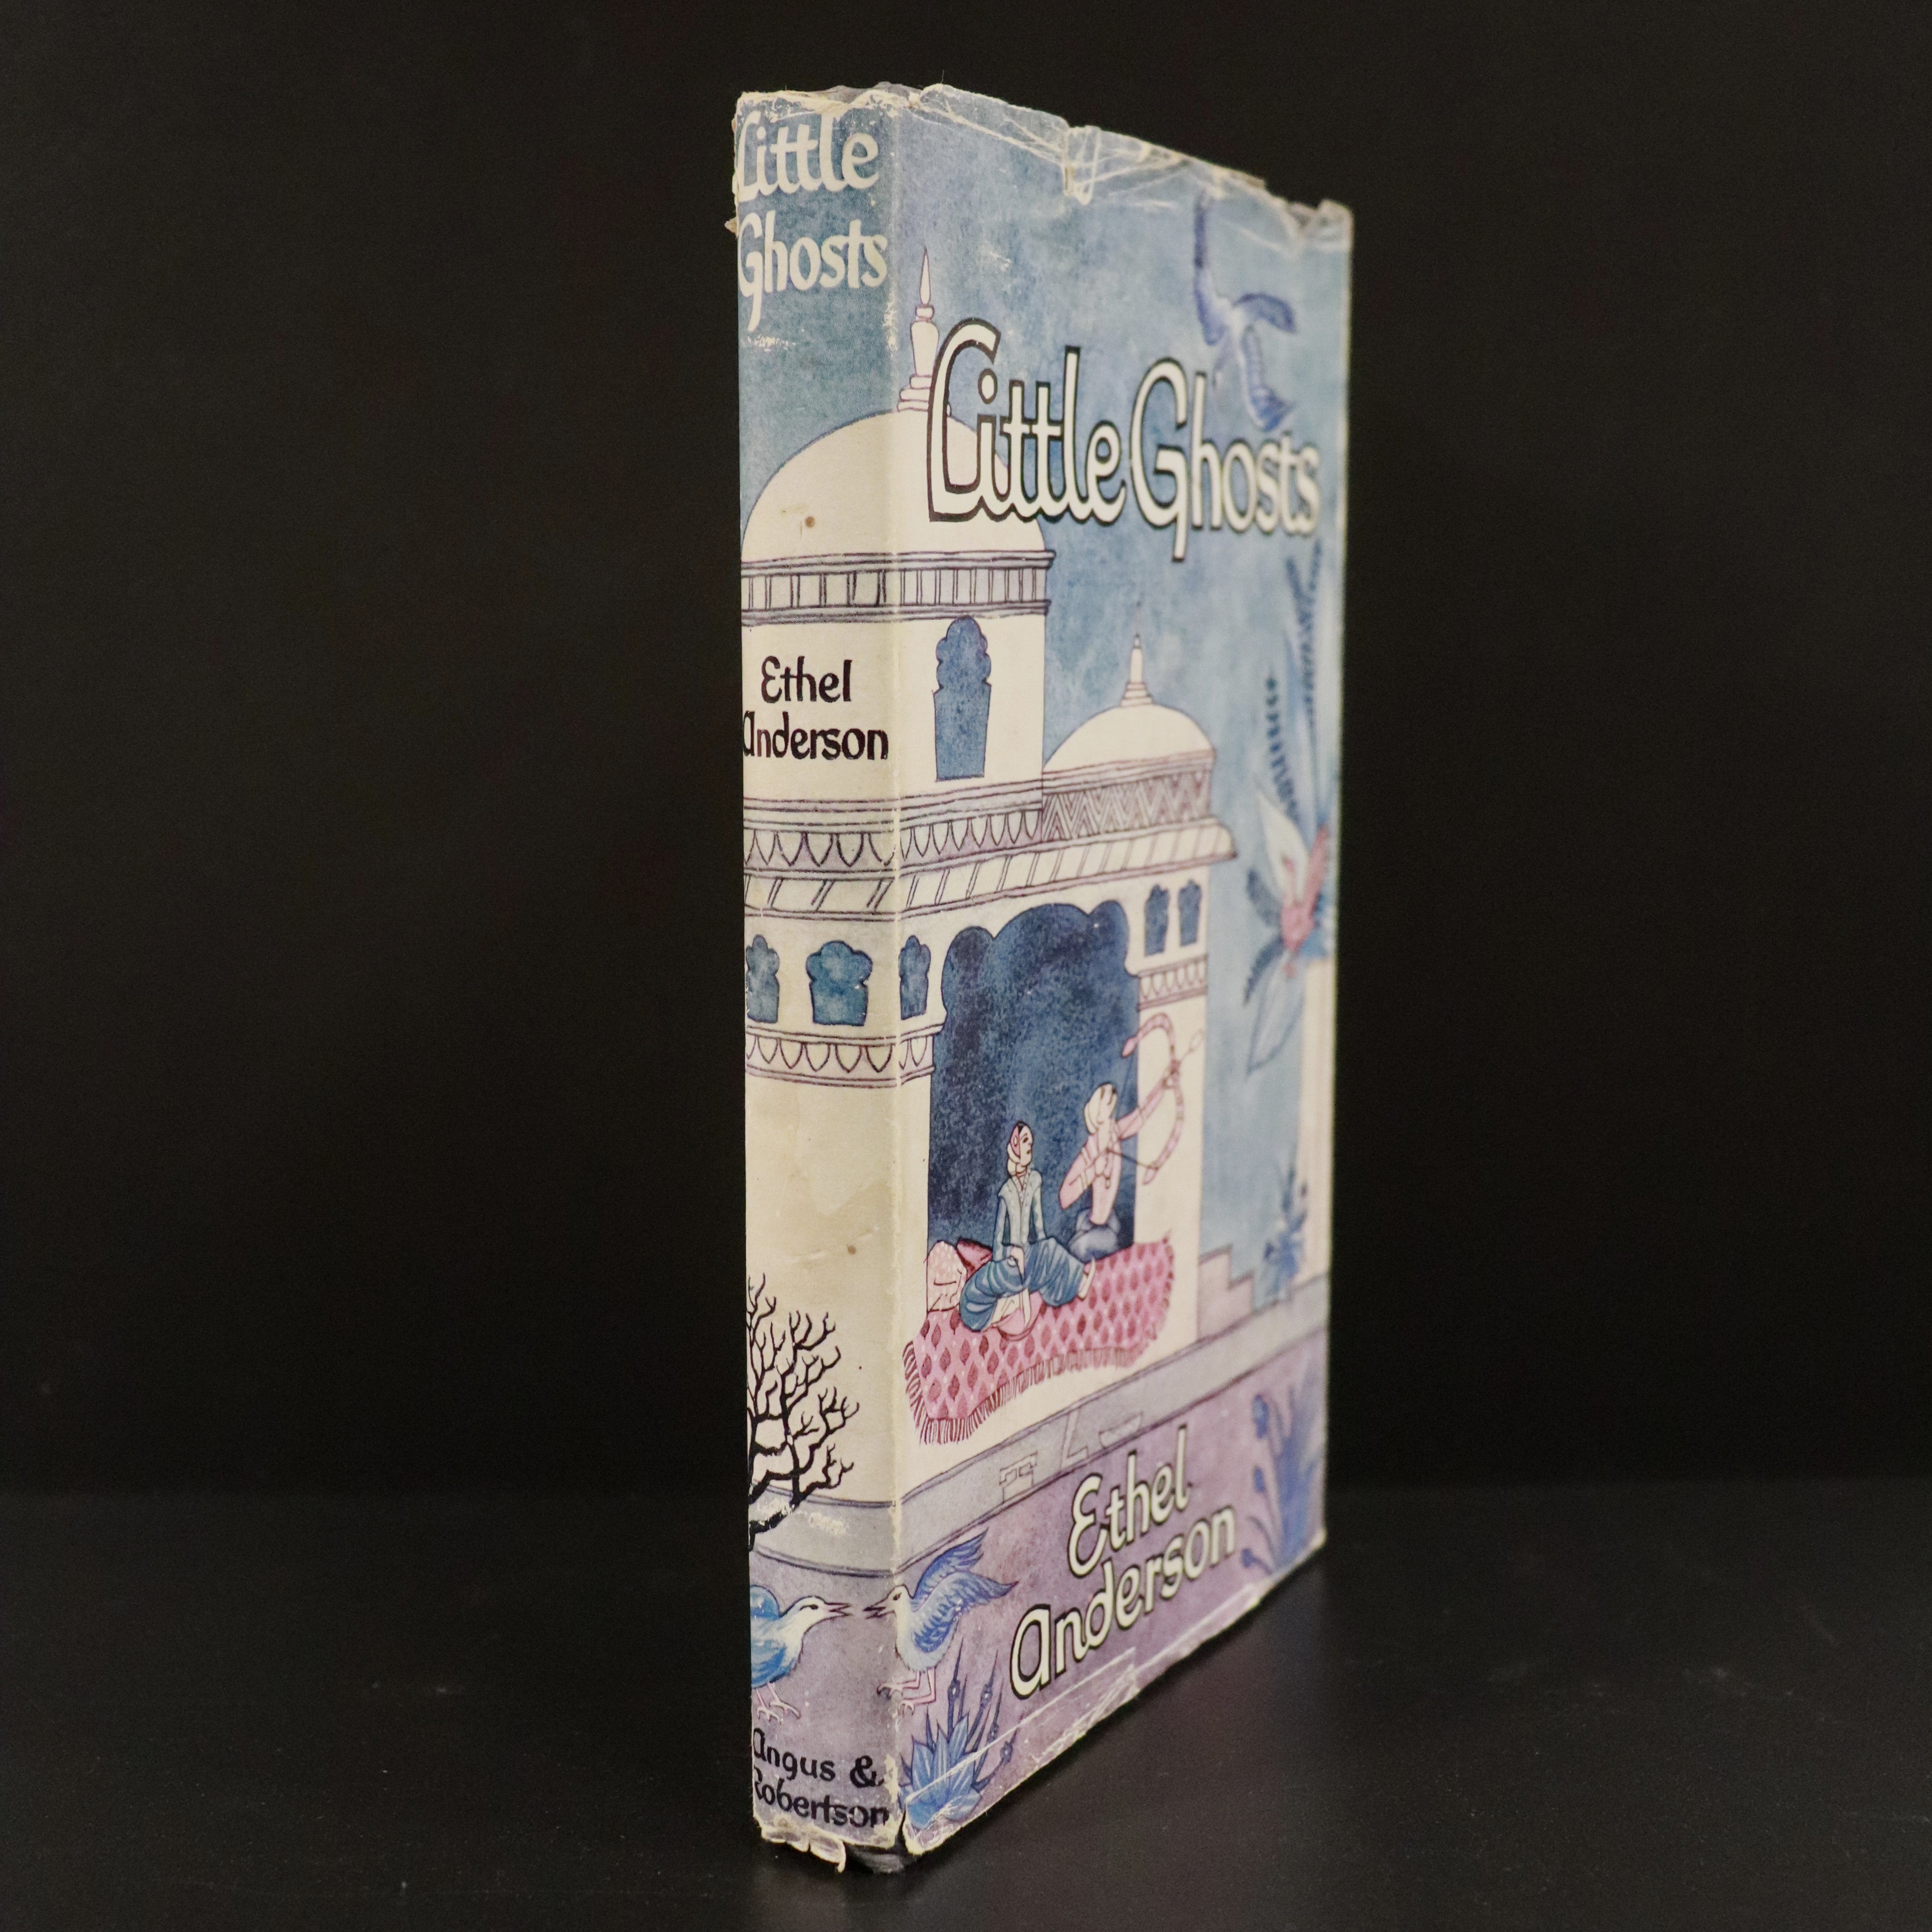 1959 The Little Ghosts by Ethel Anderson 1st Edition Australian Fiction Book